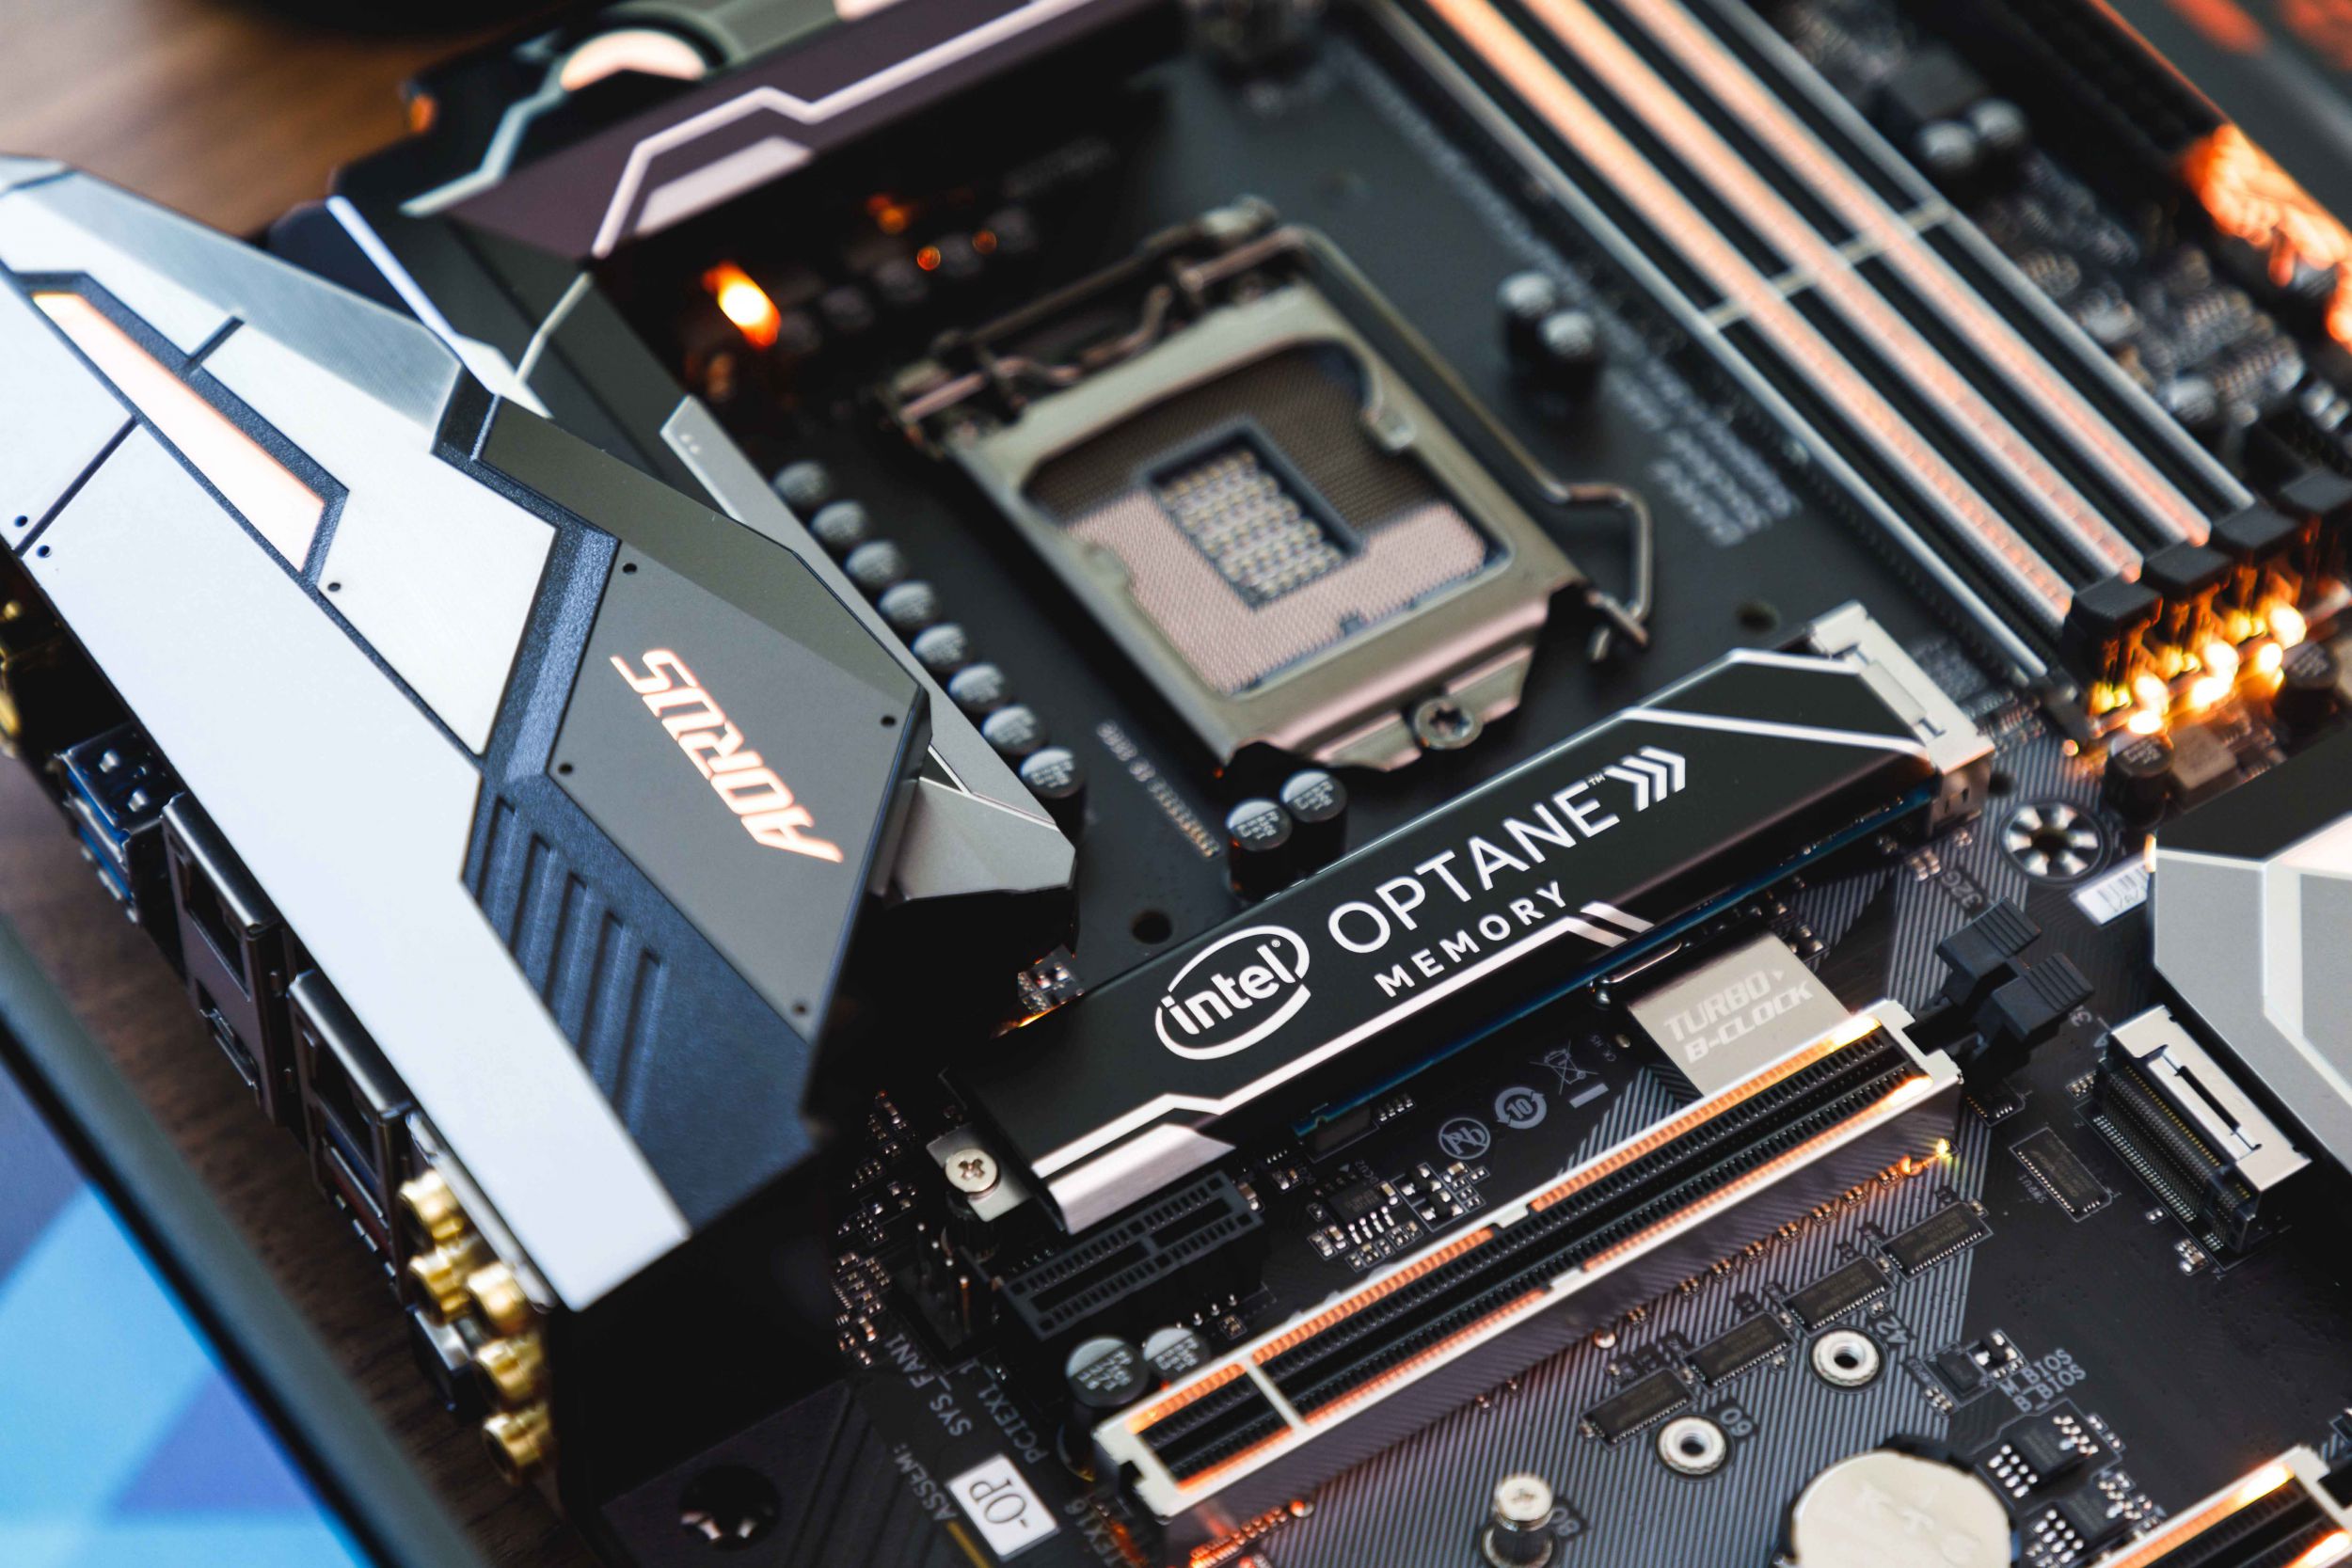 The Z370 AORUS Gaming 7-OP has Intel Optane Memory pre-installed for instant performance gains